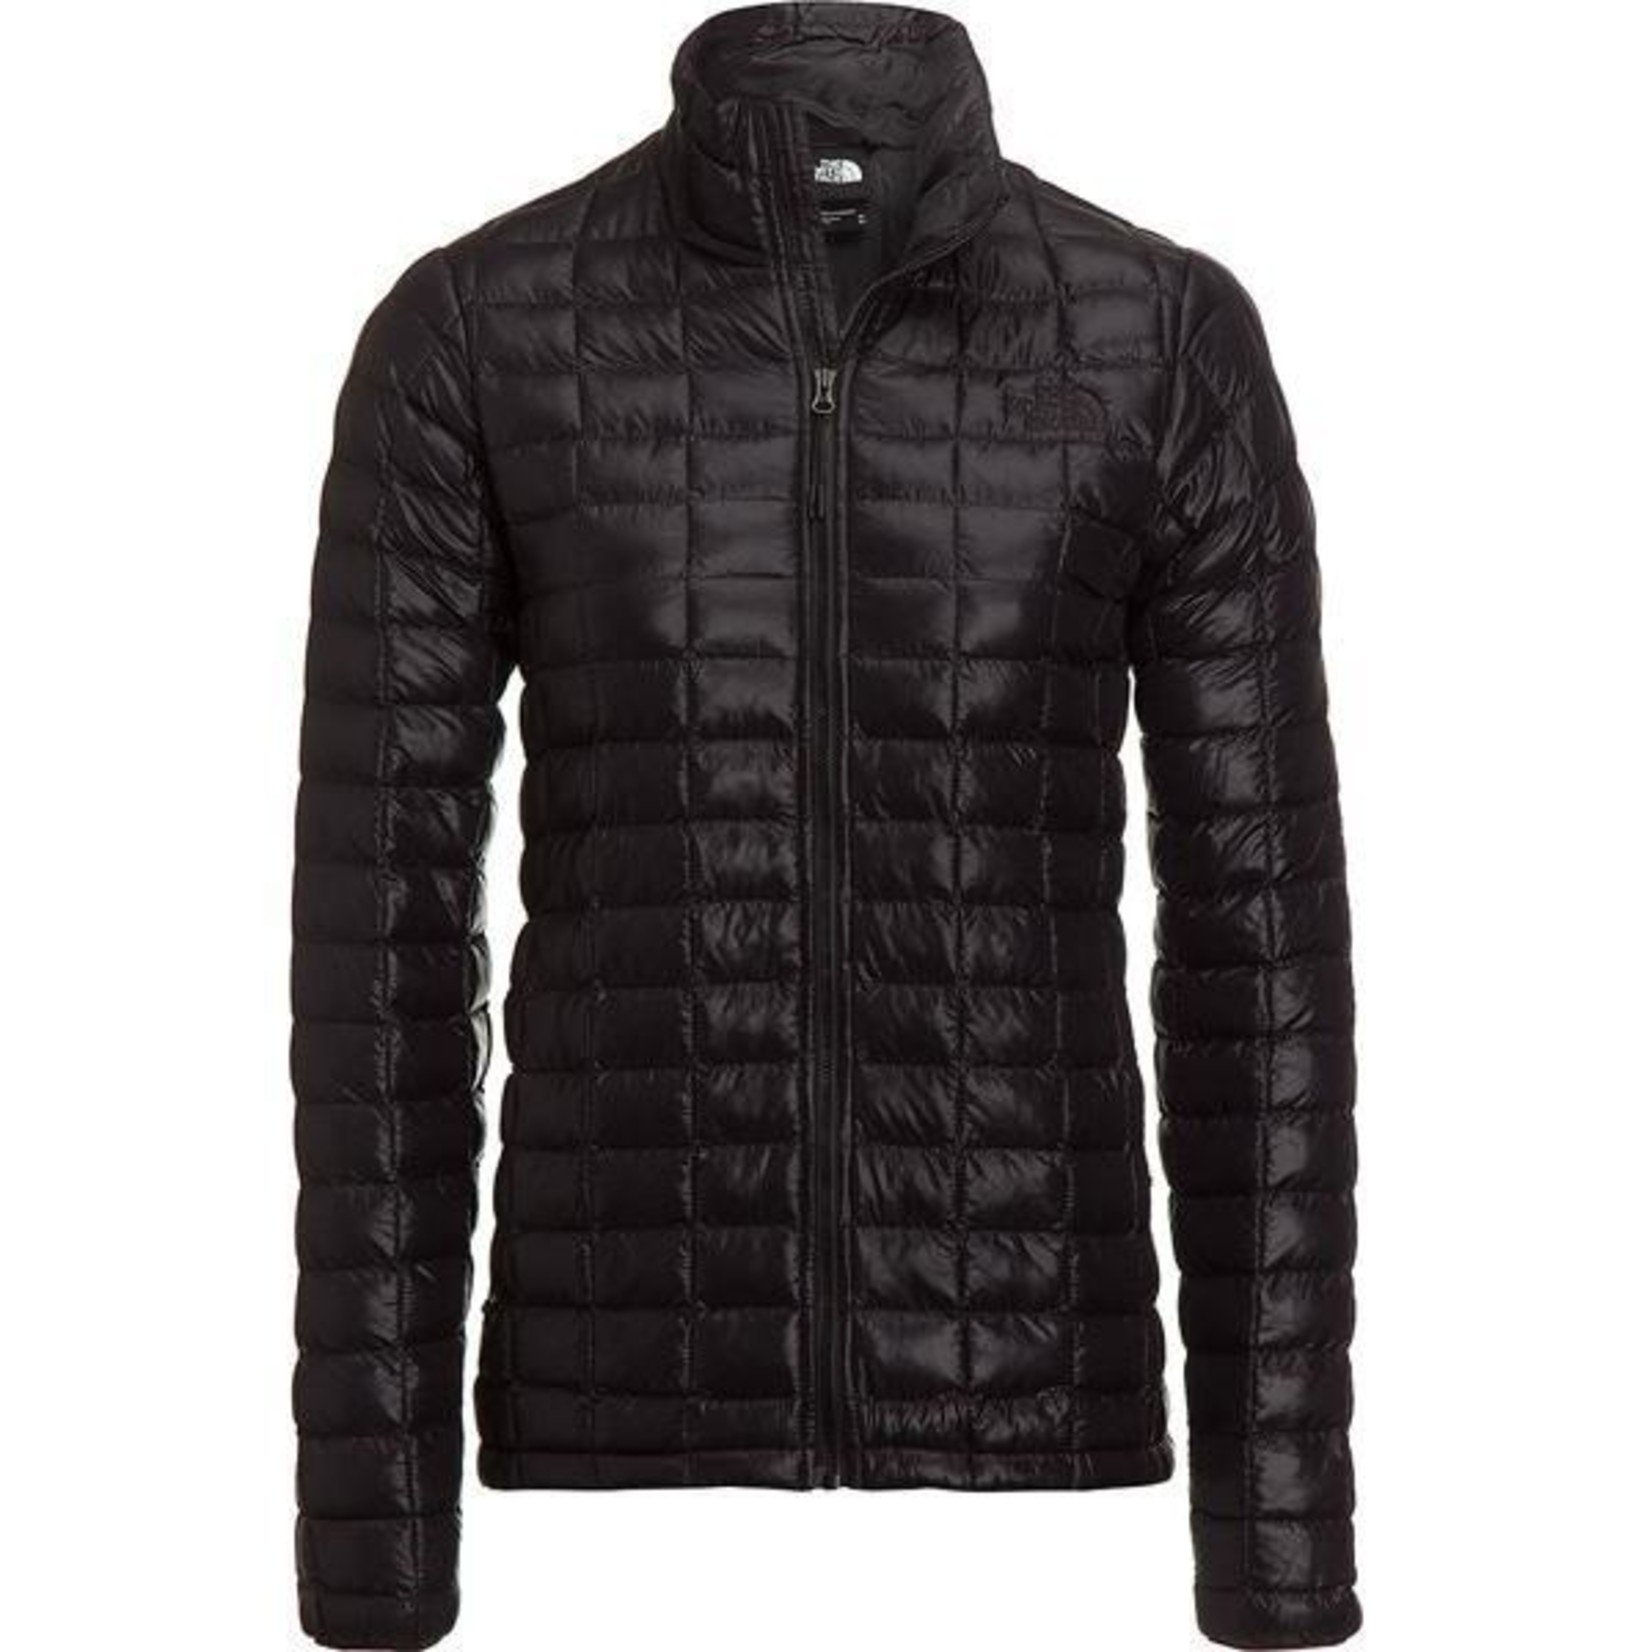 The North Face Women's ThermoBall ECO Jacket